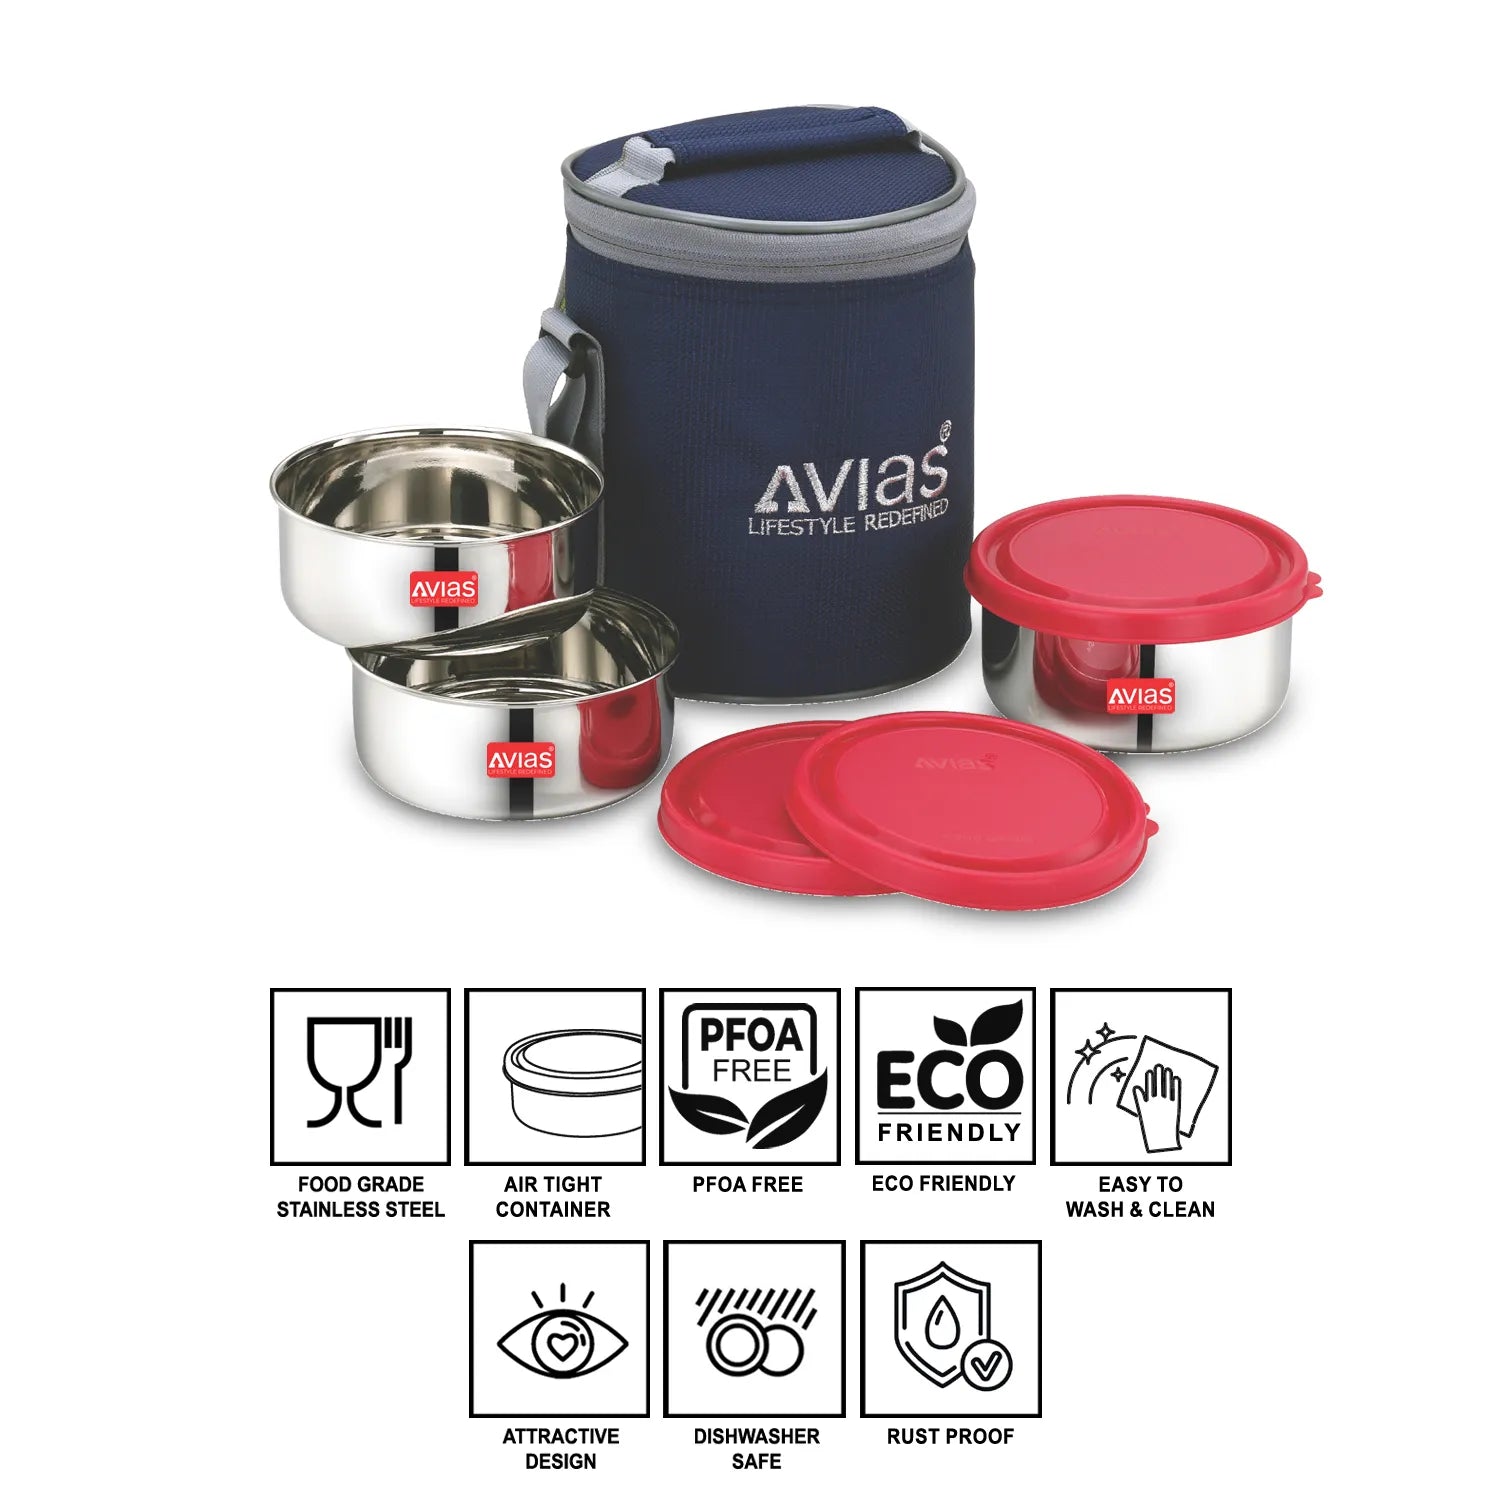 AVIAS Freshia stainless steel lunch/ tiffin box features